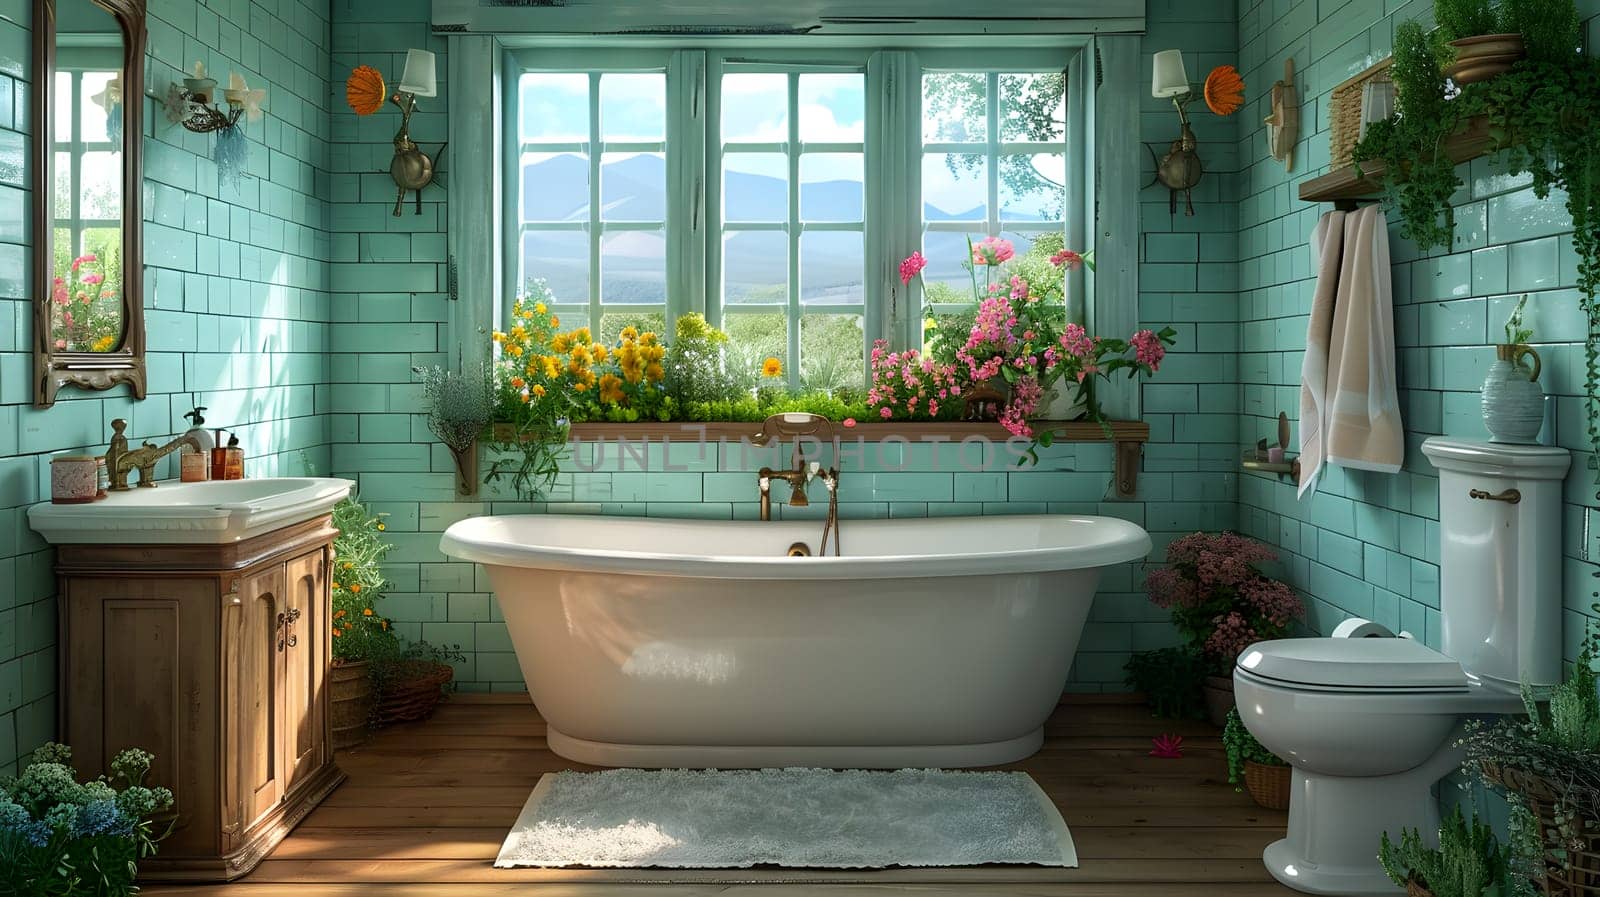 A bathroom in a house with a tub, toilet, sink, and window overlooking a green plant. The interior design features fixtures on the floor